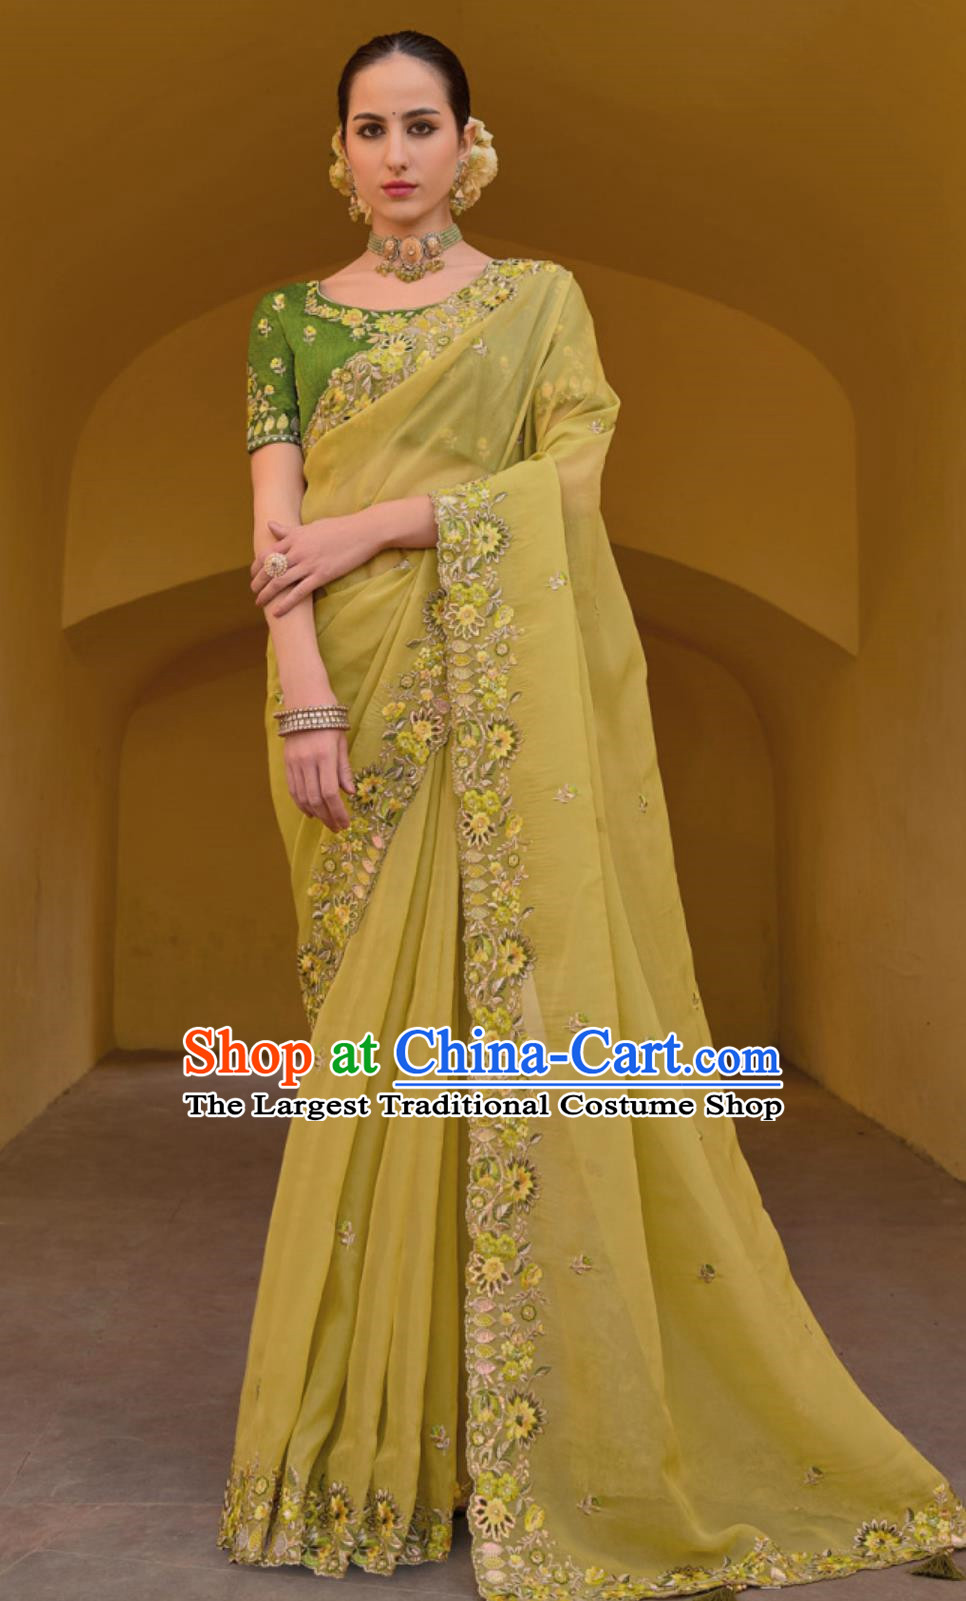 Indian Traditional Festival Fashion Women Embroidered Yellow Sari Dress India National Clothing